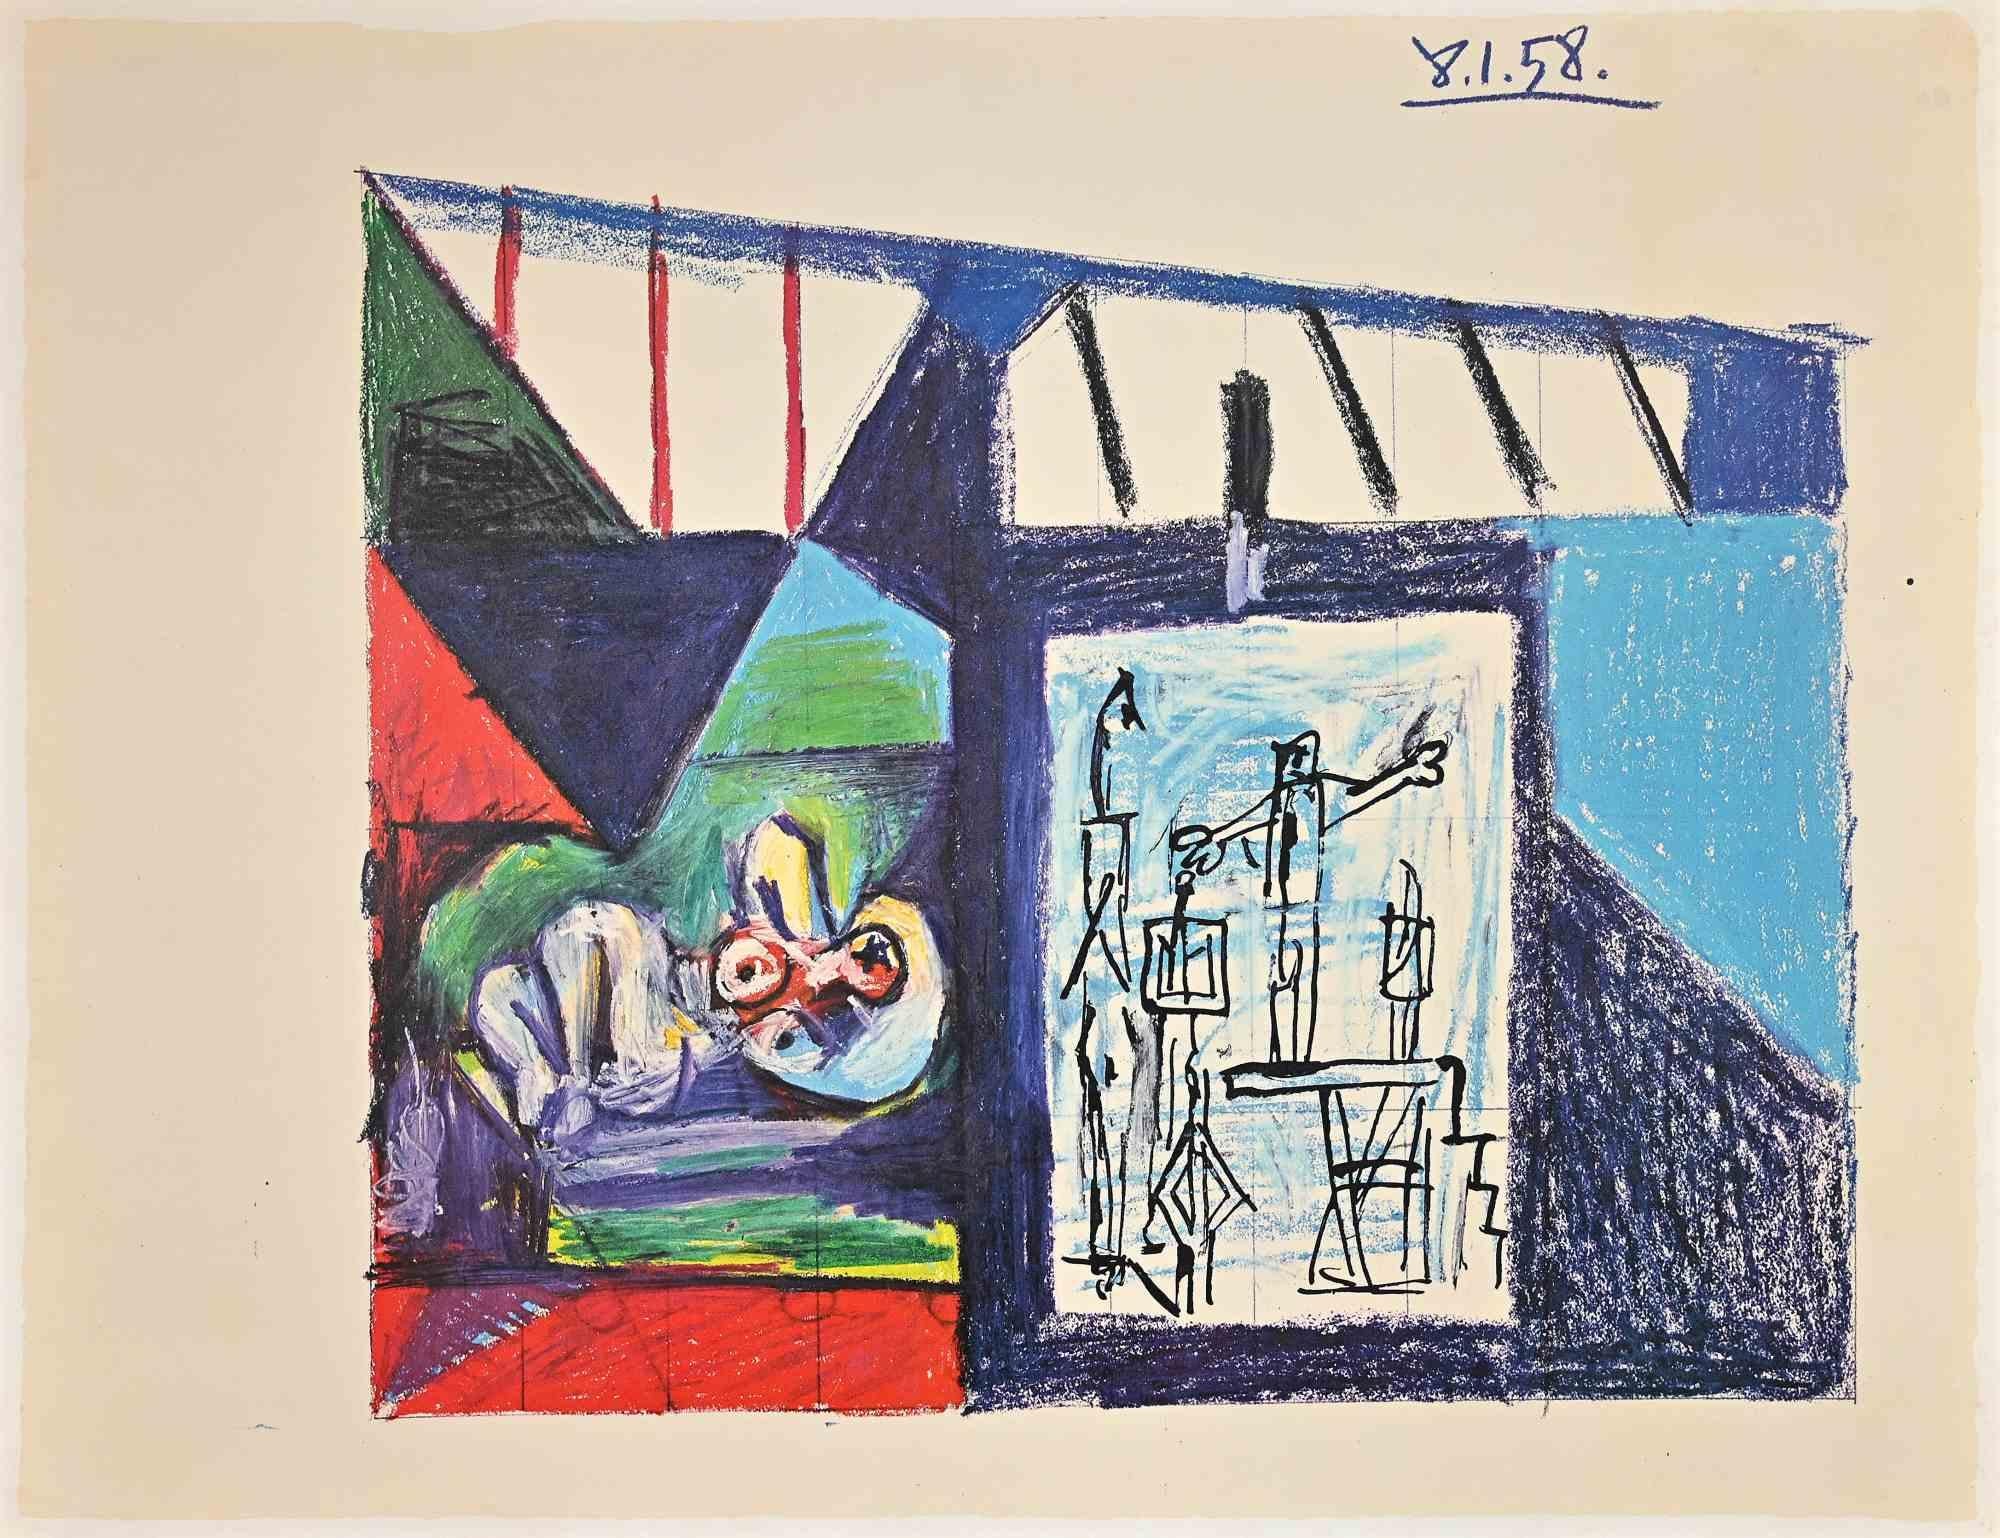 Interior is a vintage photolithograph realized after Pablo Picasso, after the original drawing of 1958.

Signed on the plate.

Very good conditions.

Pablo Picasso (Malaga, 1881 - Moujins, 1973) in the 1973. He was a Spanish painter, sculptor,